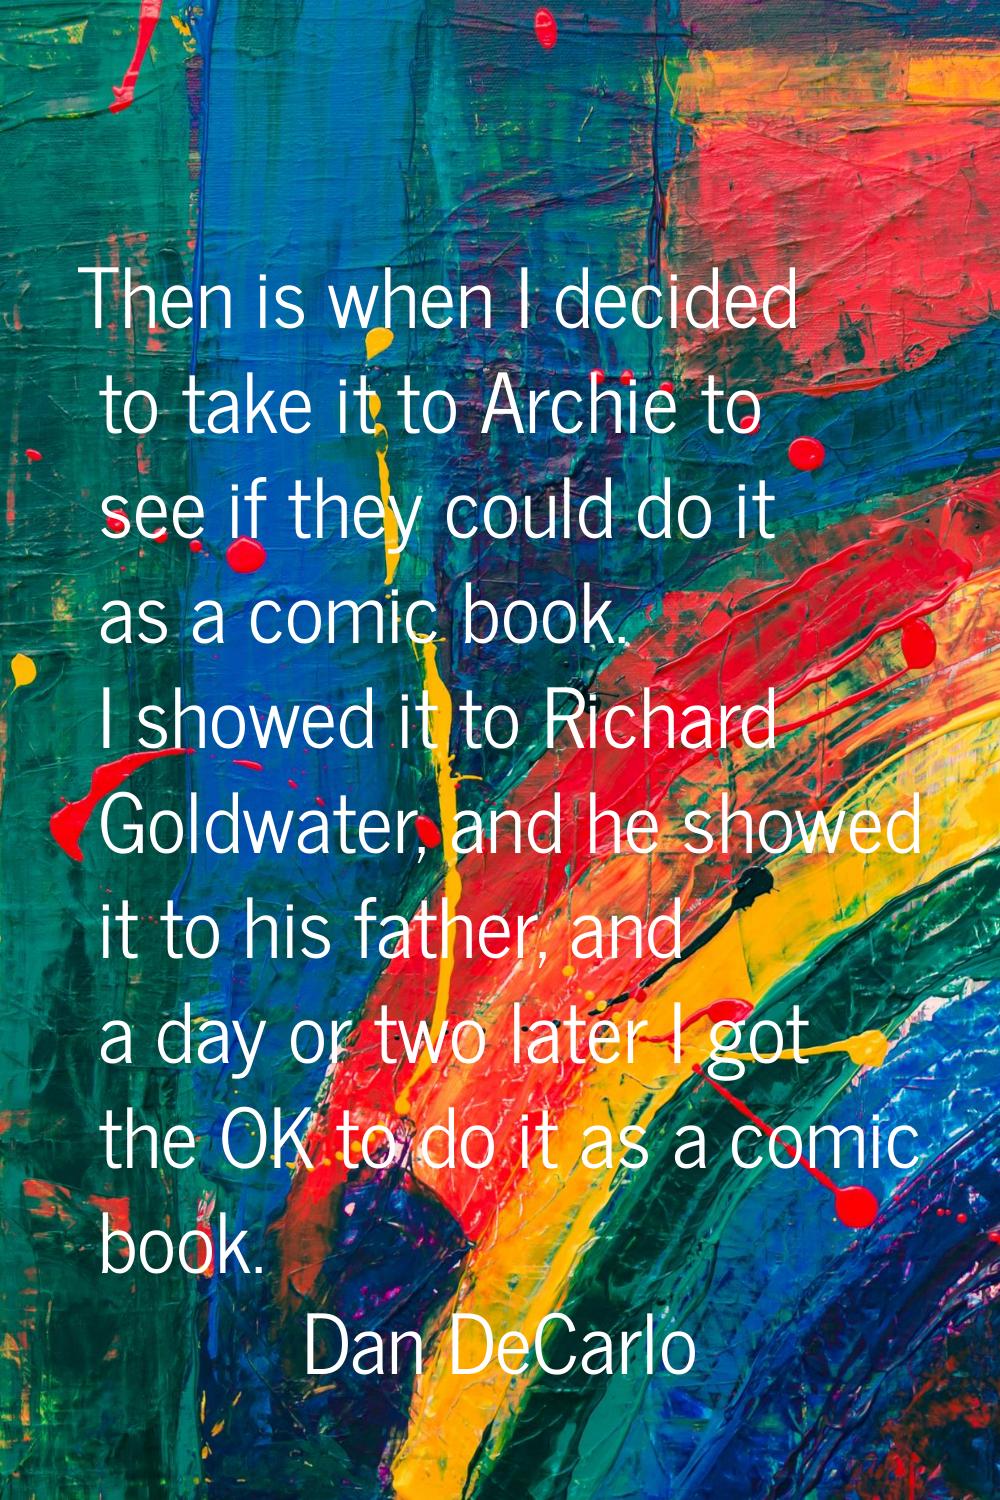 Then is when I decided to take it to Archie to see if they could do it as a comic book. I showed it